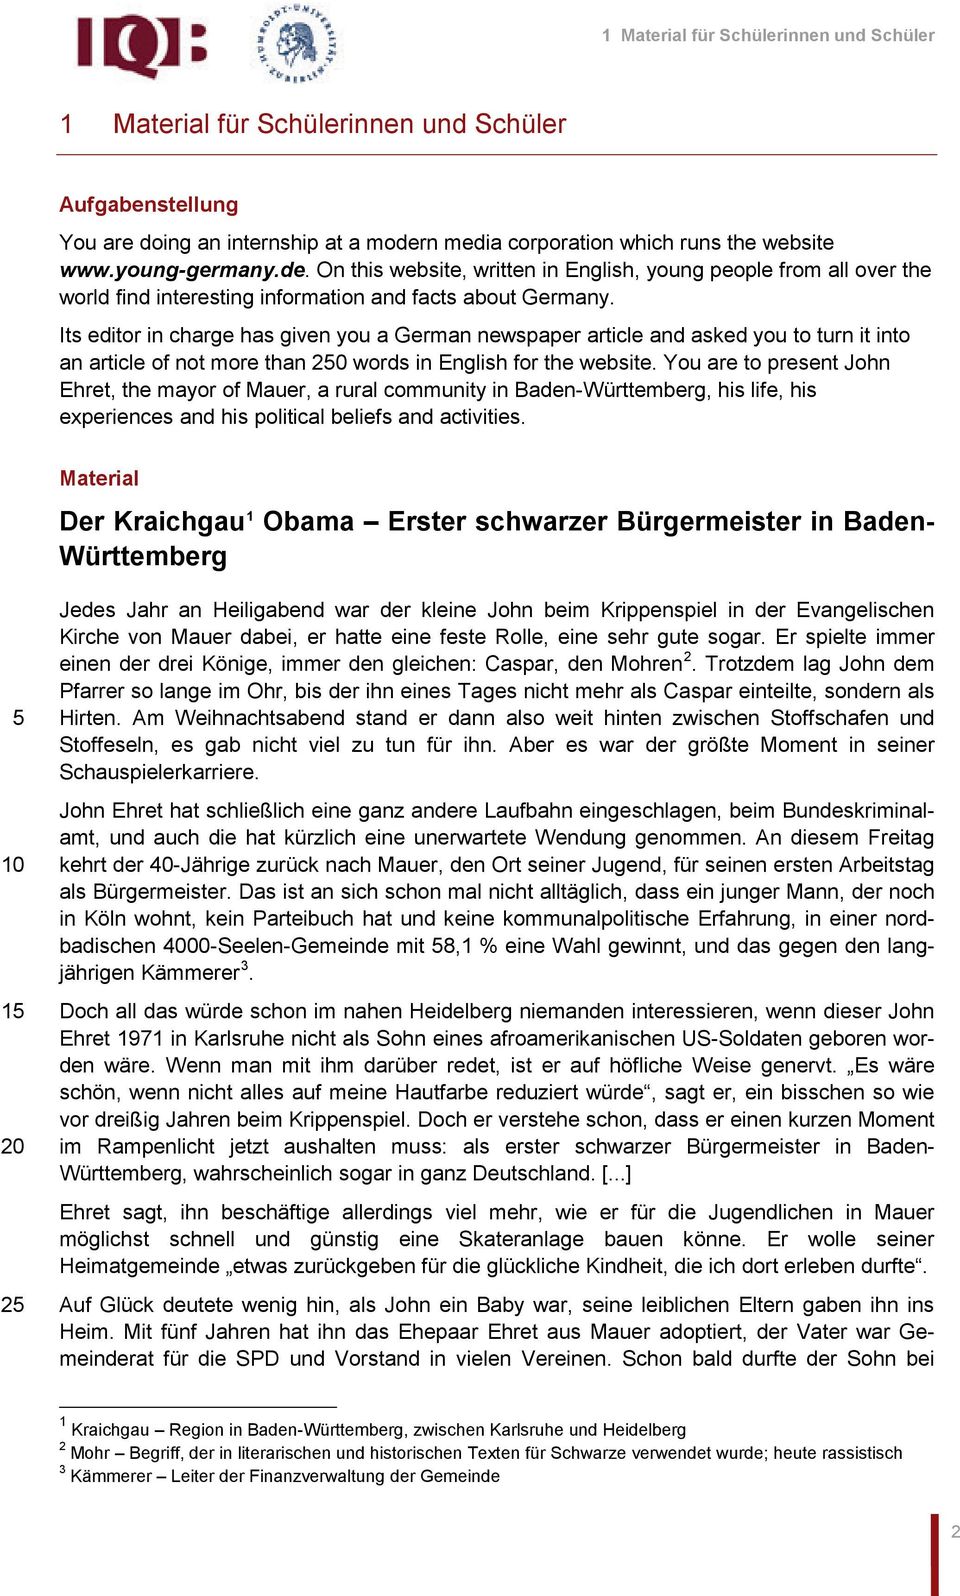 Its editor in charge has given you a German newspaper article and asked you to turn it into an article of not more than 250 words in English for the website.